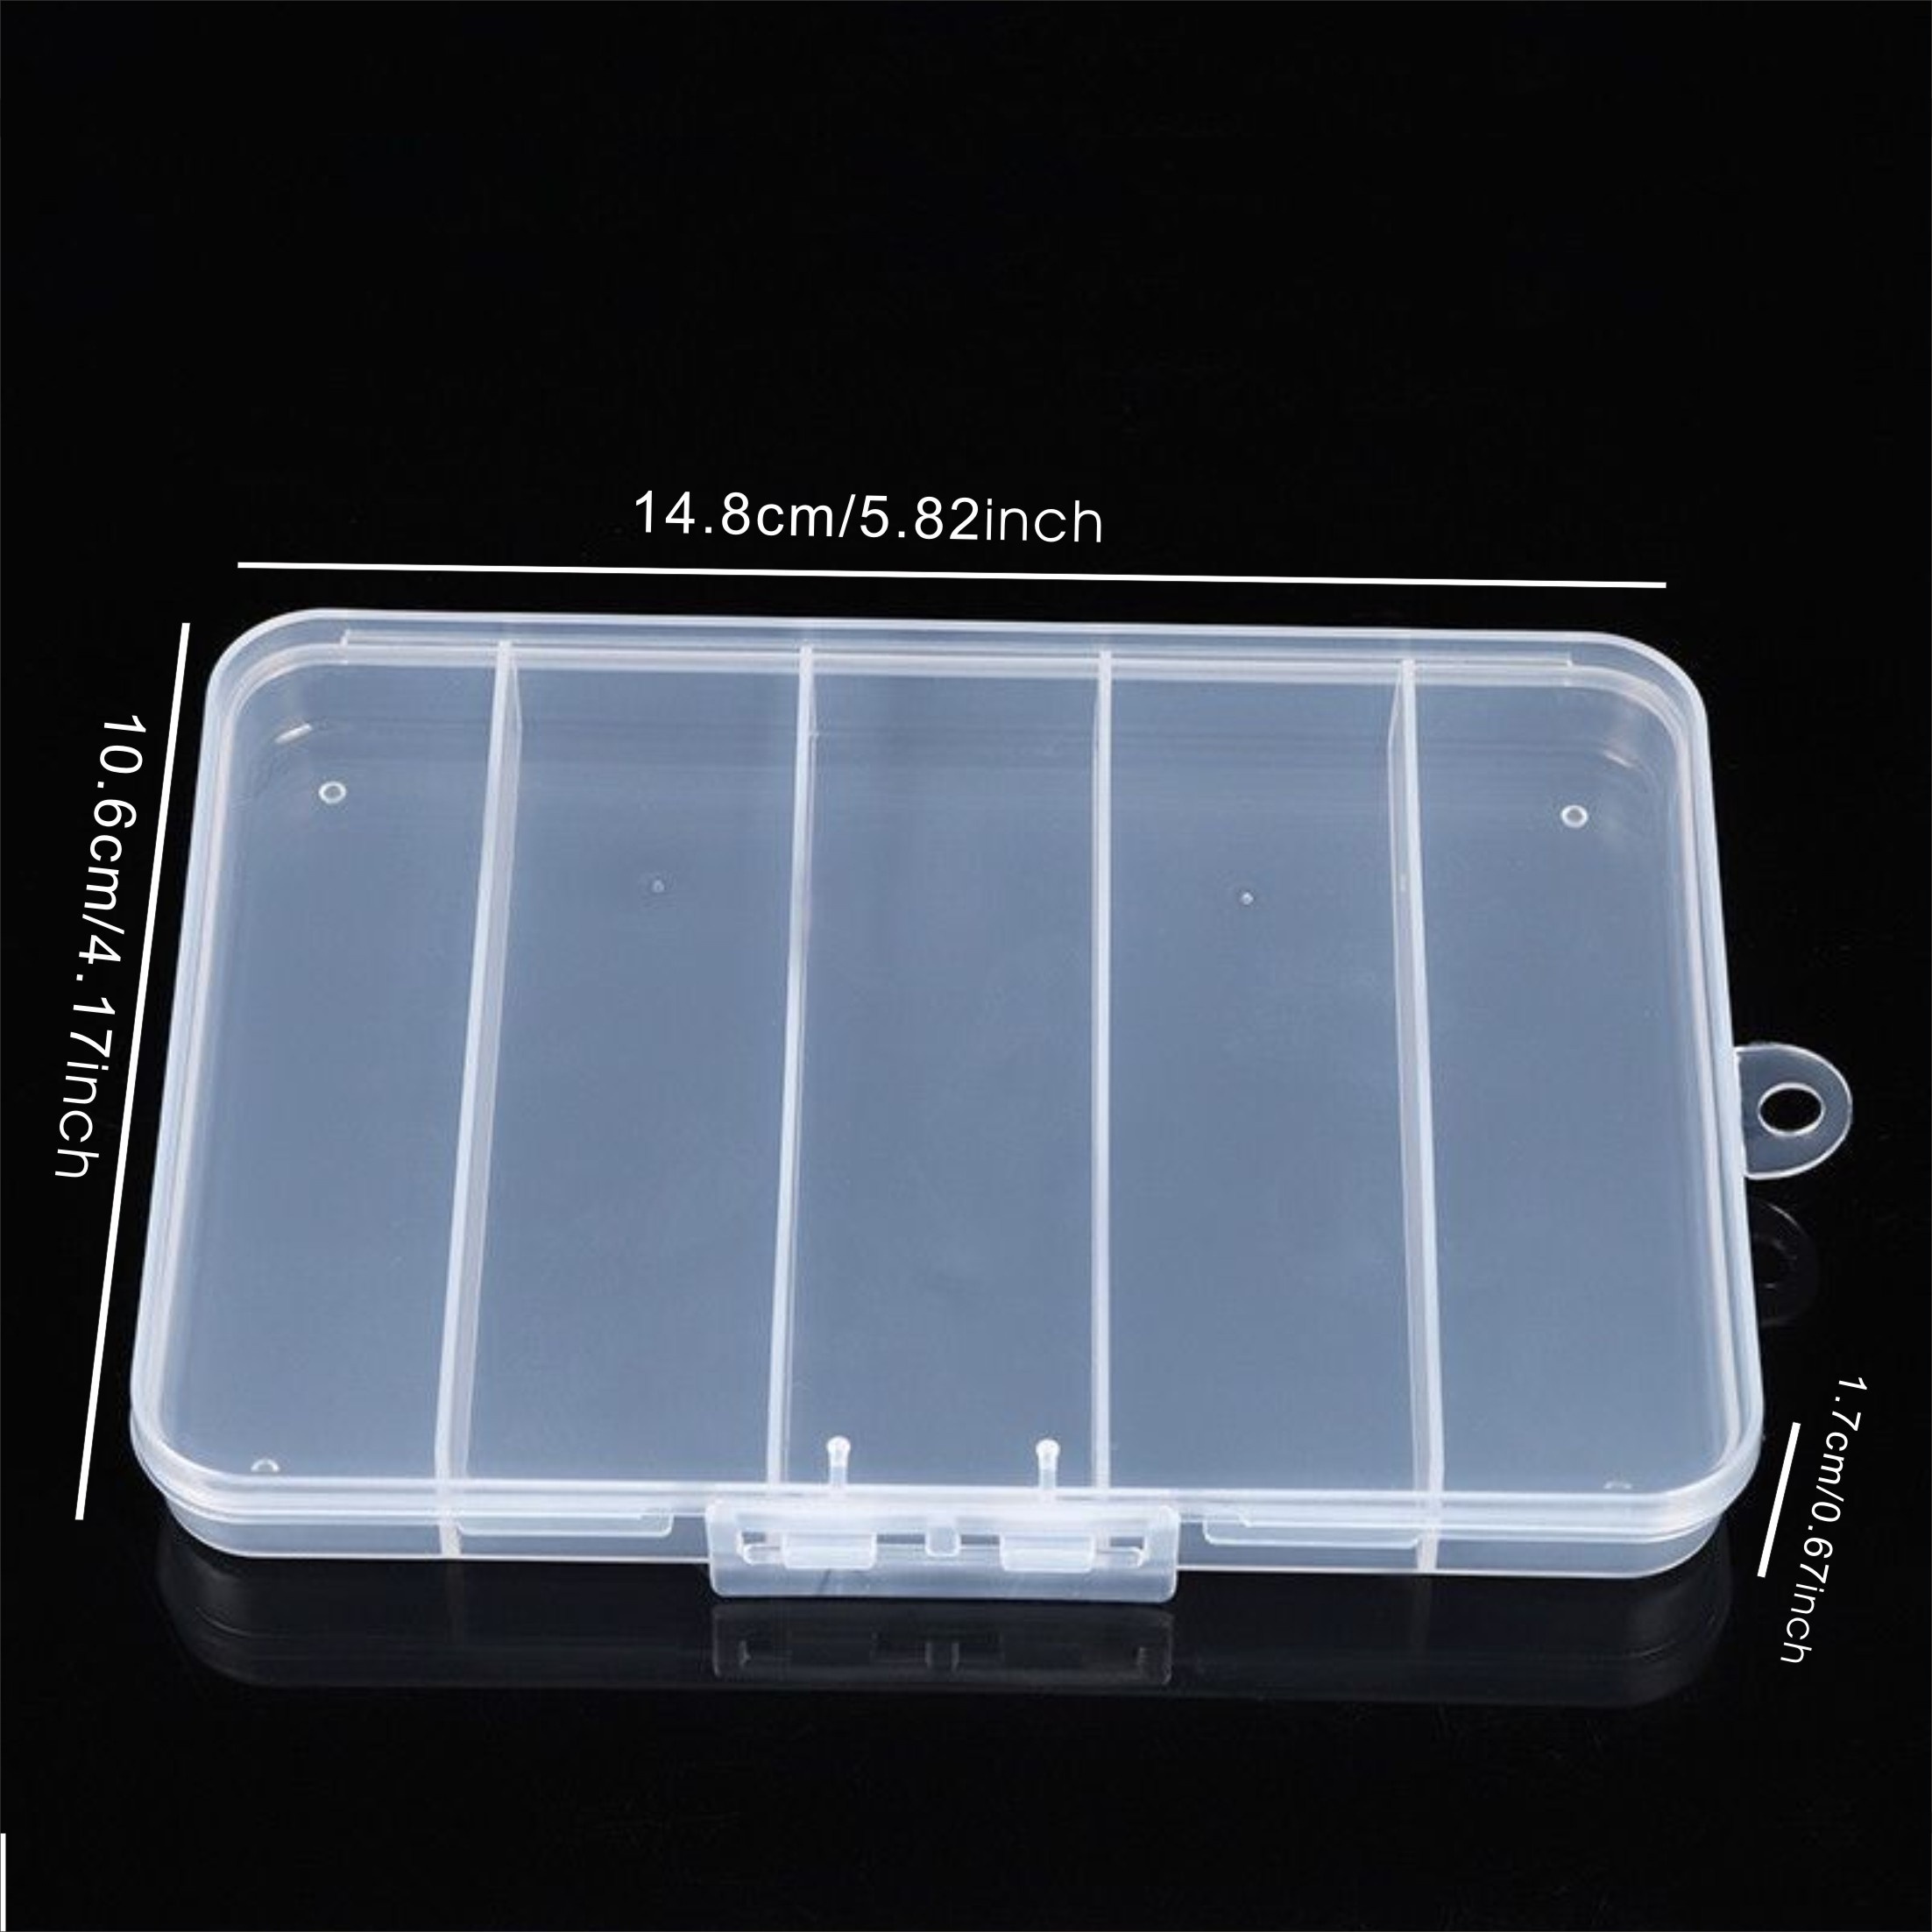  Storage Bin, Easy Access Grid Storage Box Plastic Dustproof  Transparent for Nails DIY Crafts (9 Compartments) : Home & Kitchen